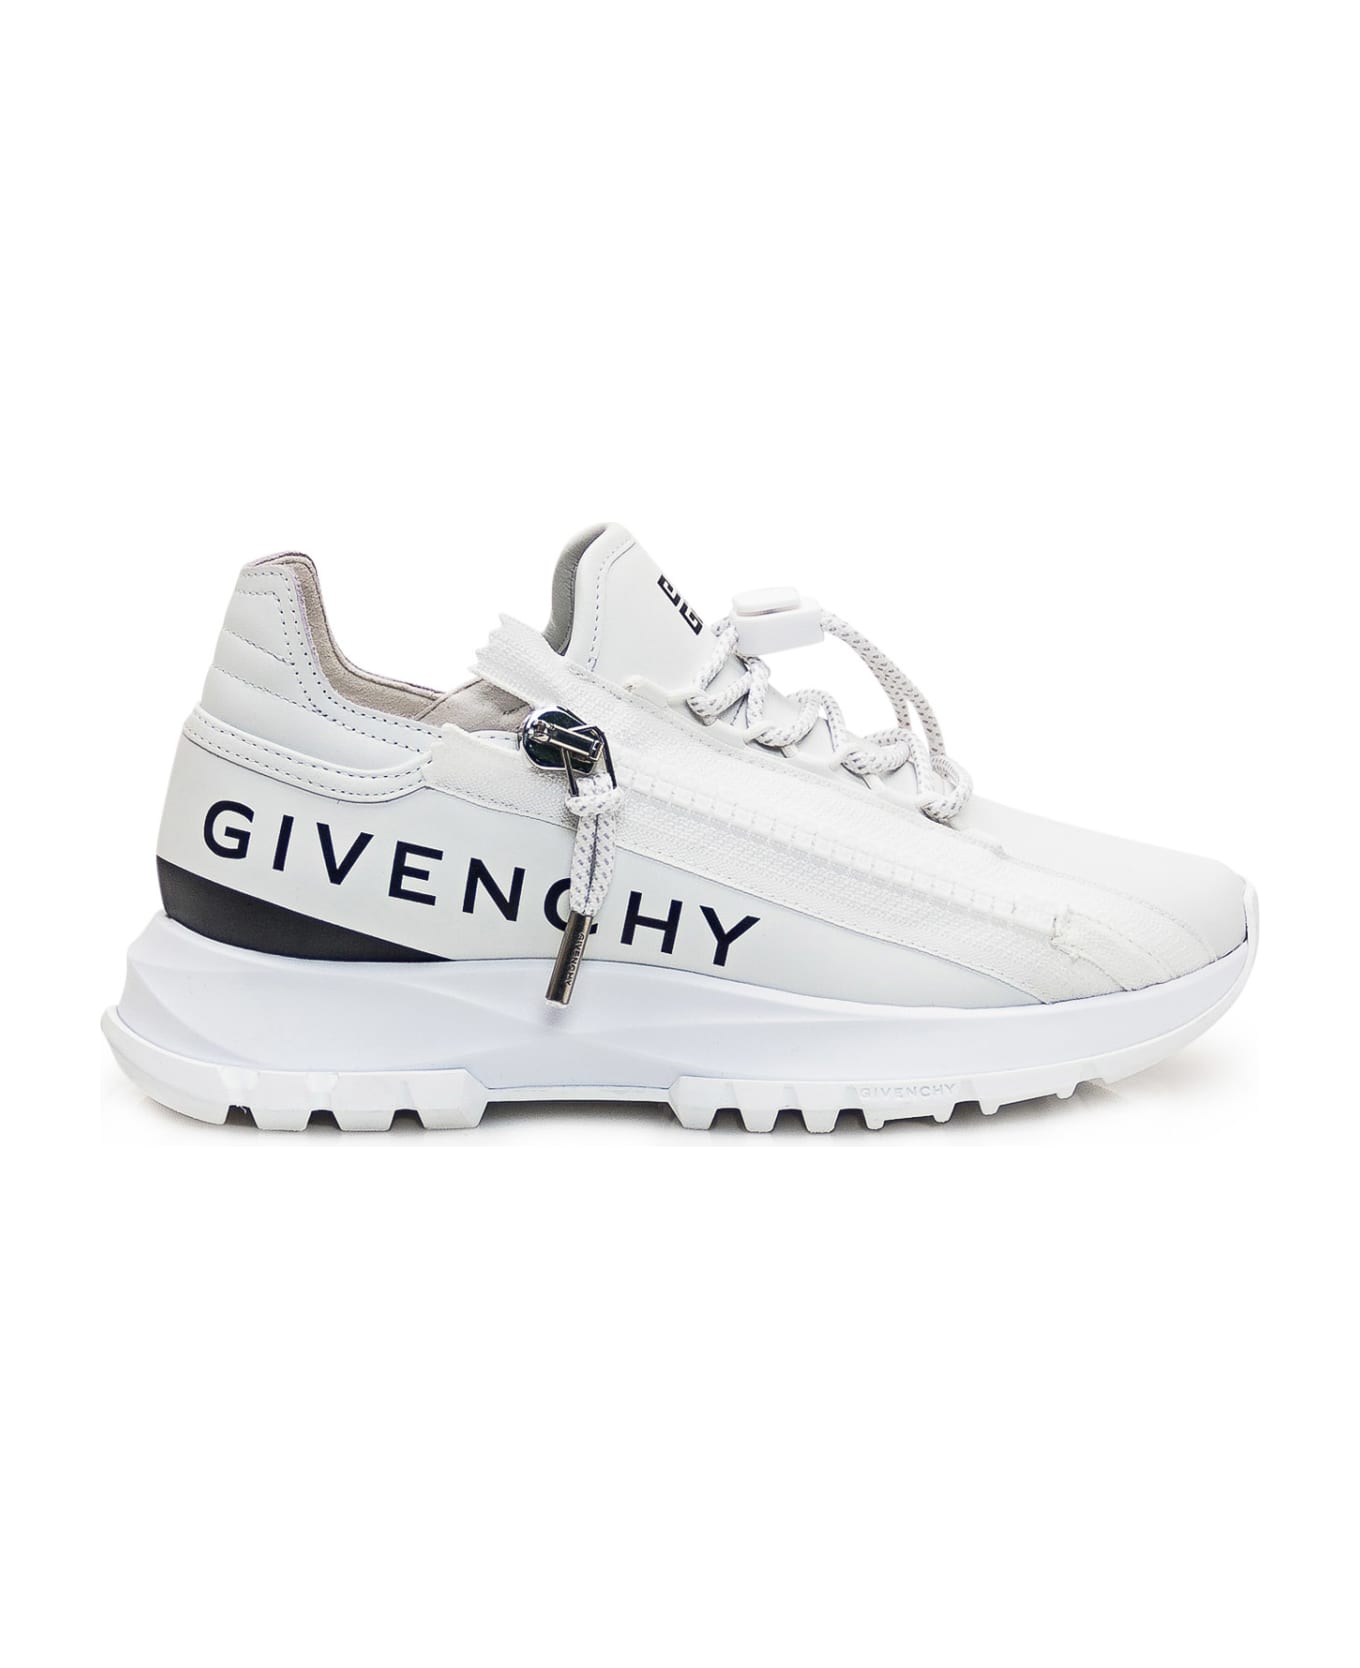 Givenchy 'spectre' Sneakers - WHITE BLACK スニーカー